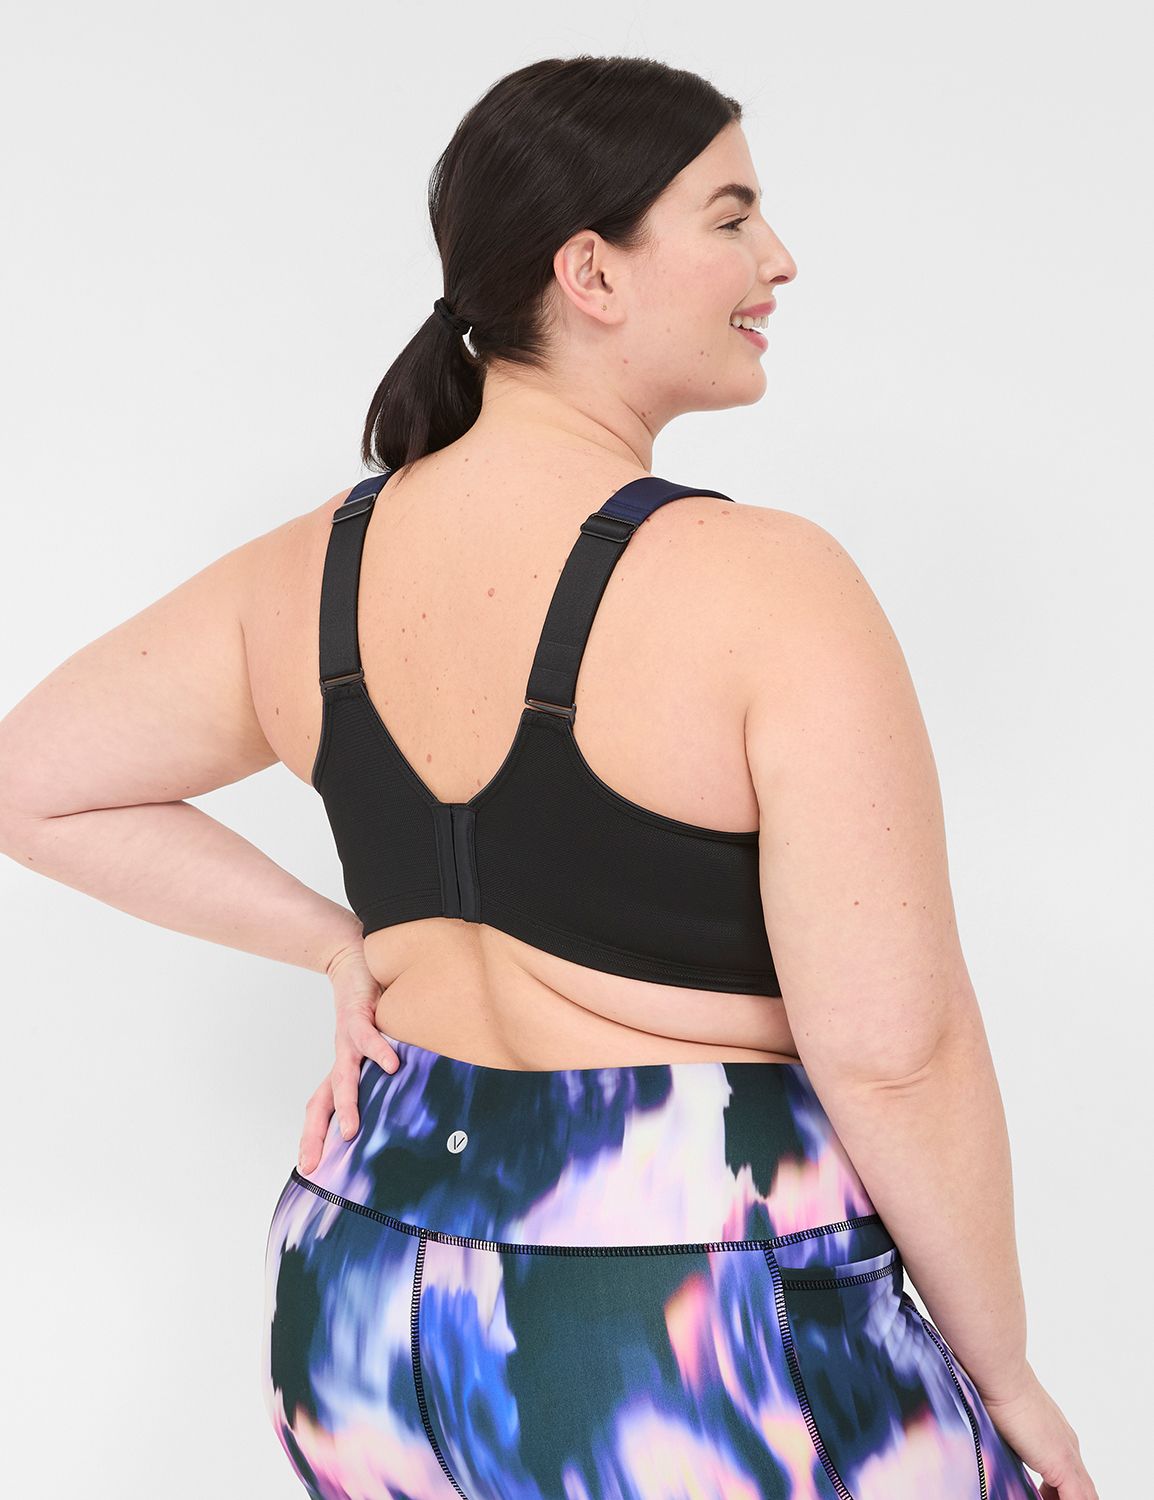 TLF Plus-Sized Activewear On Sale Up To 90% Off Retail